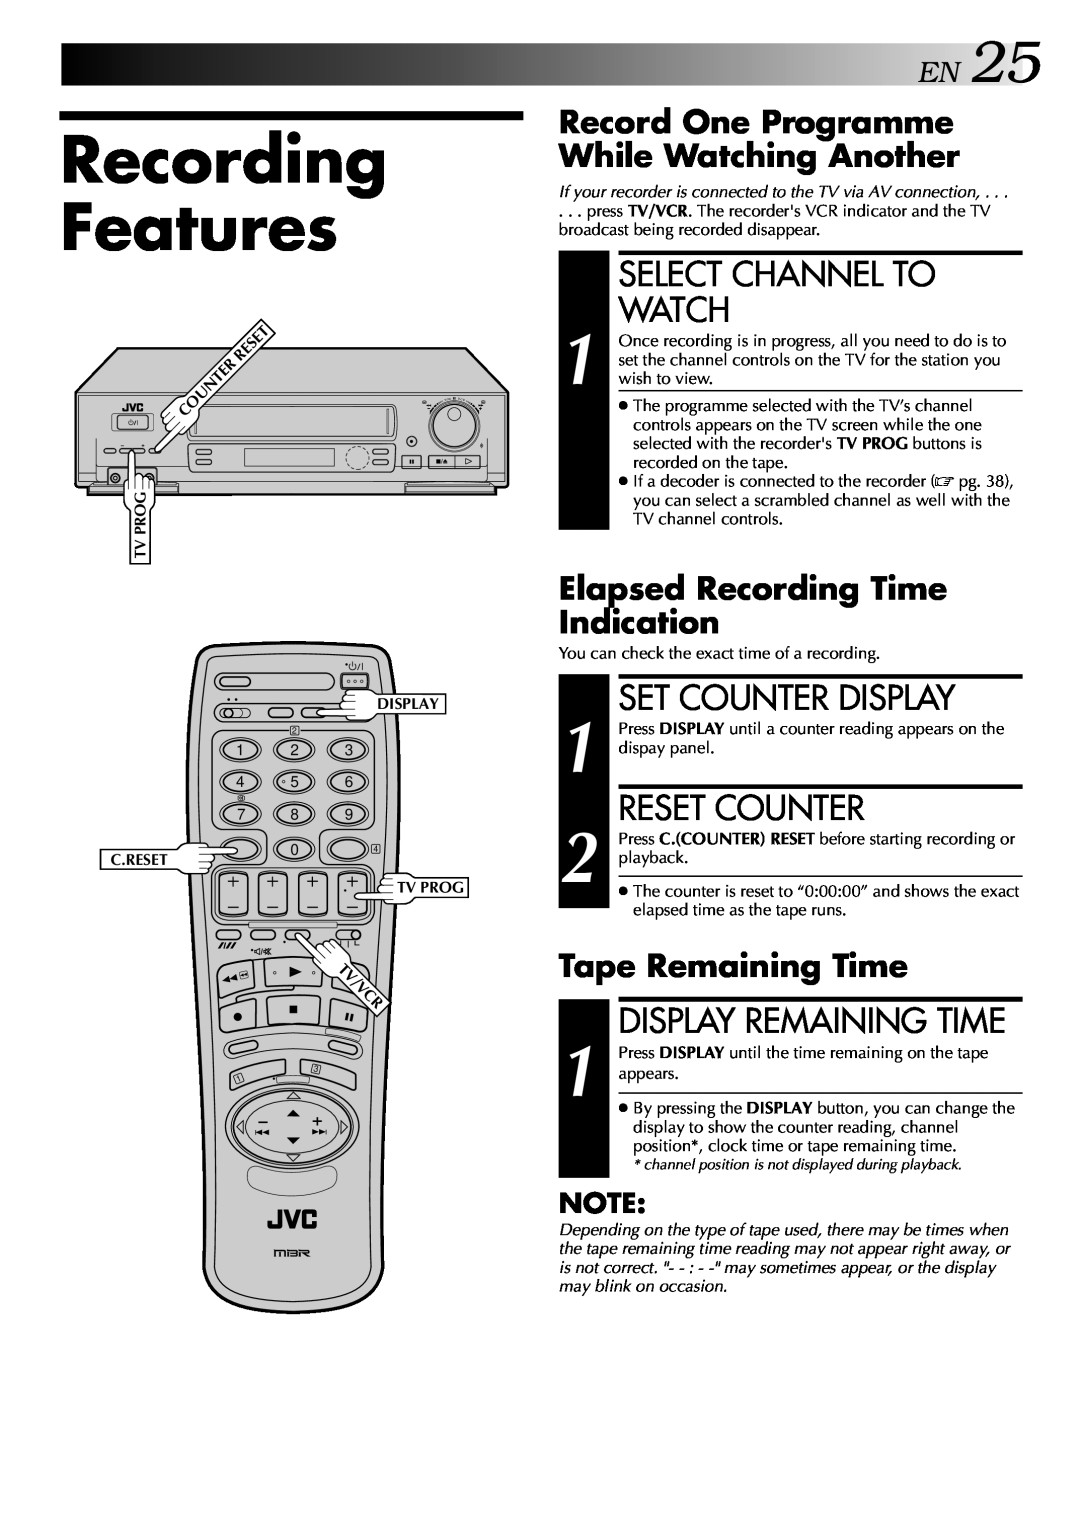 JVC HR-DD848E Recording, Features, EN25, Select Channel To, Watch, Set Counter Display, Reset Counter, Tape Remaining Time 